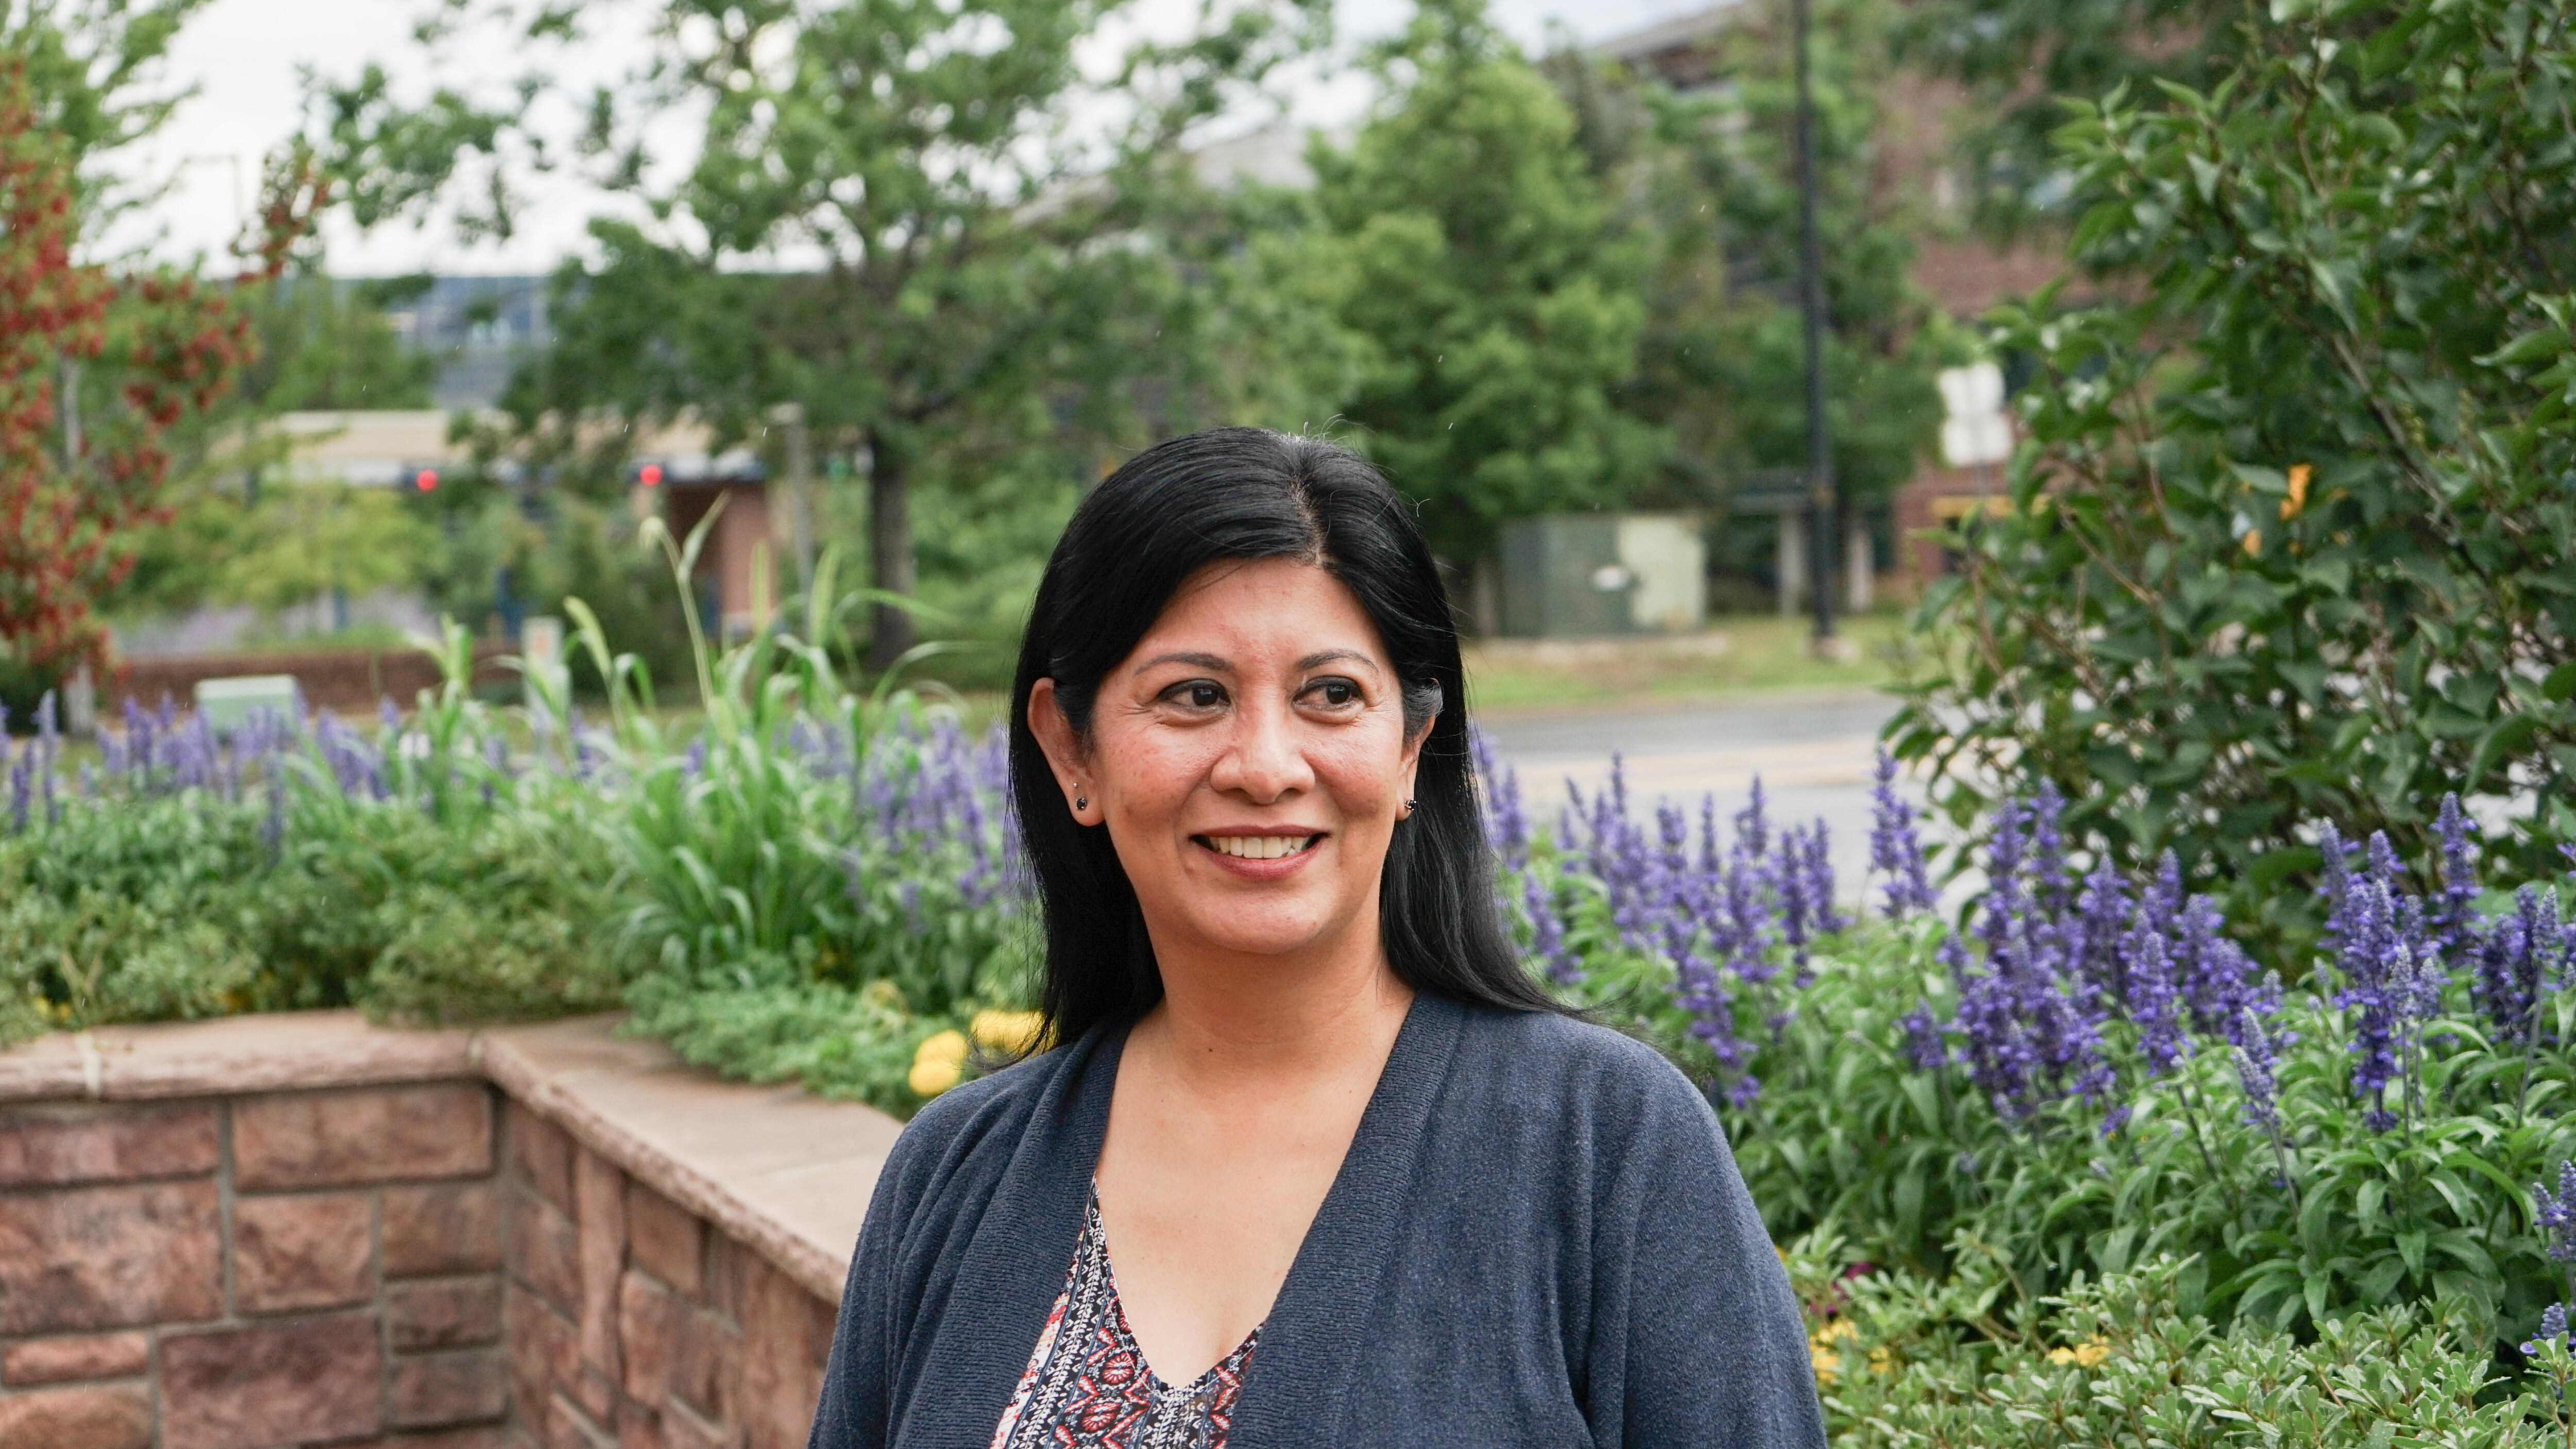 A woman with shoulder-length dark hair poses for a portrait outside a building. She’s in a park-like setting with lots of purple flowering plants around her.